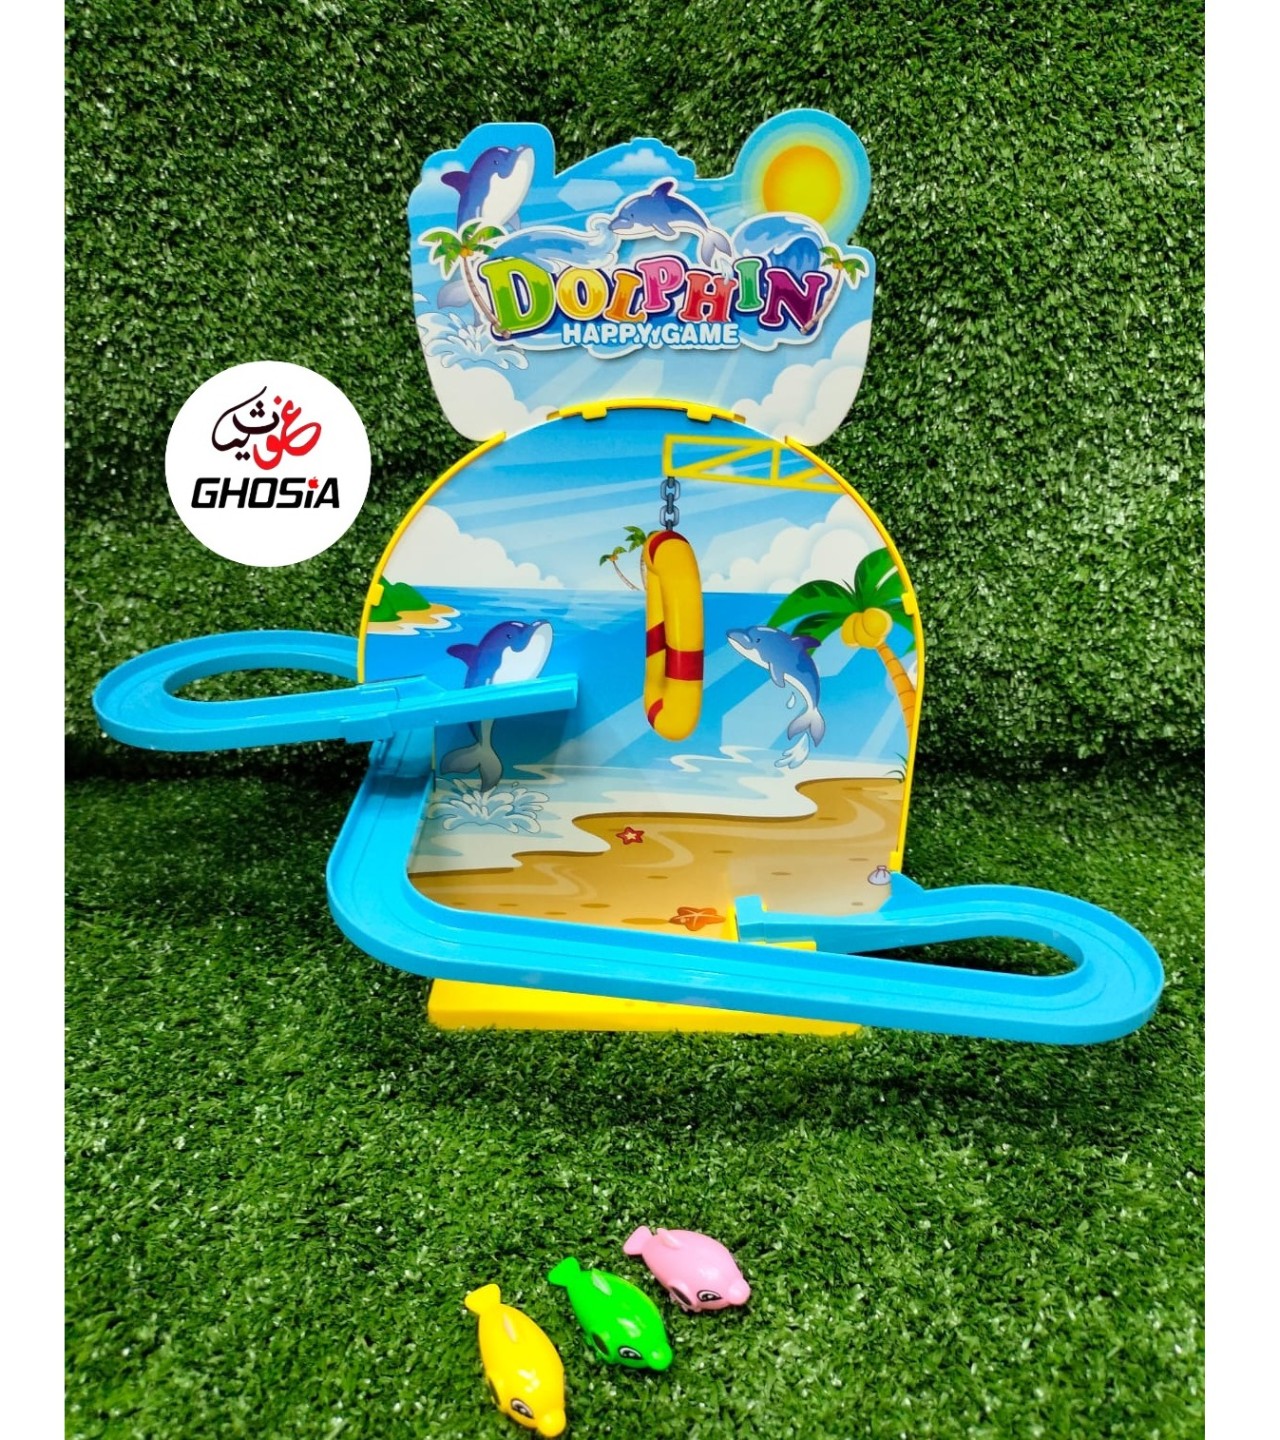 Playful Jumping Dolphin Playset Magnetic Fish DIY Track Set with Cheerful Music & Colorful Fish